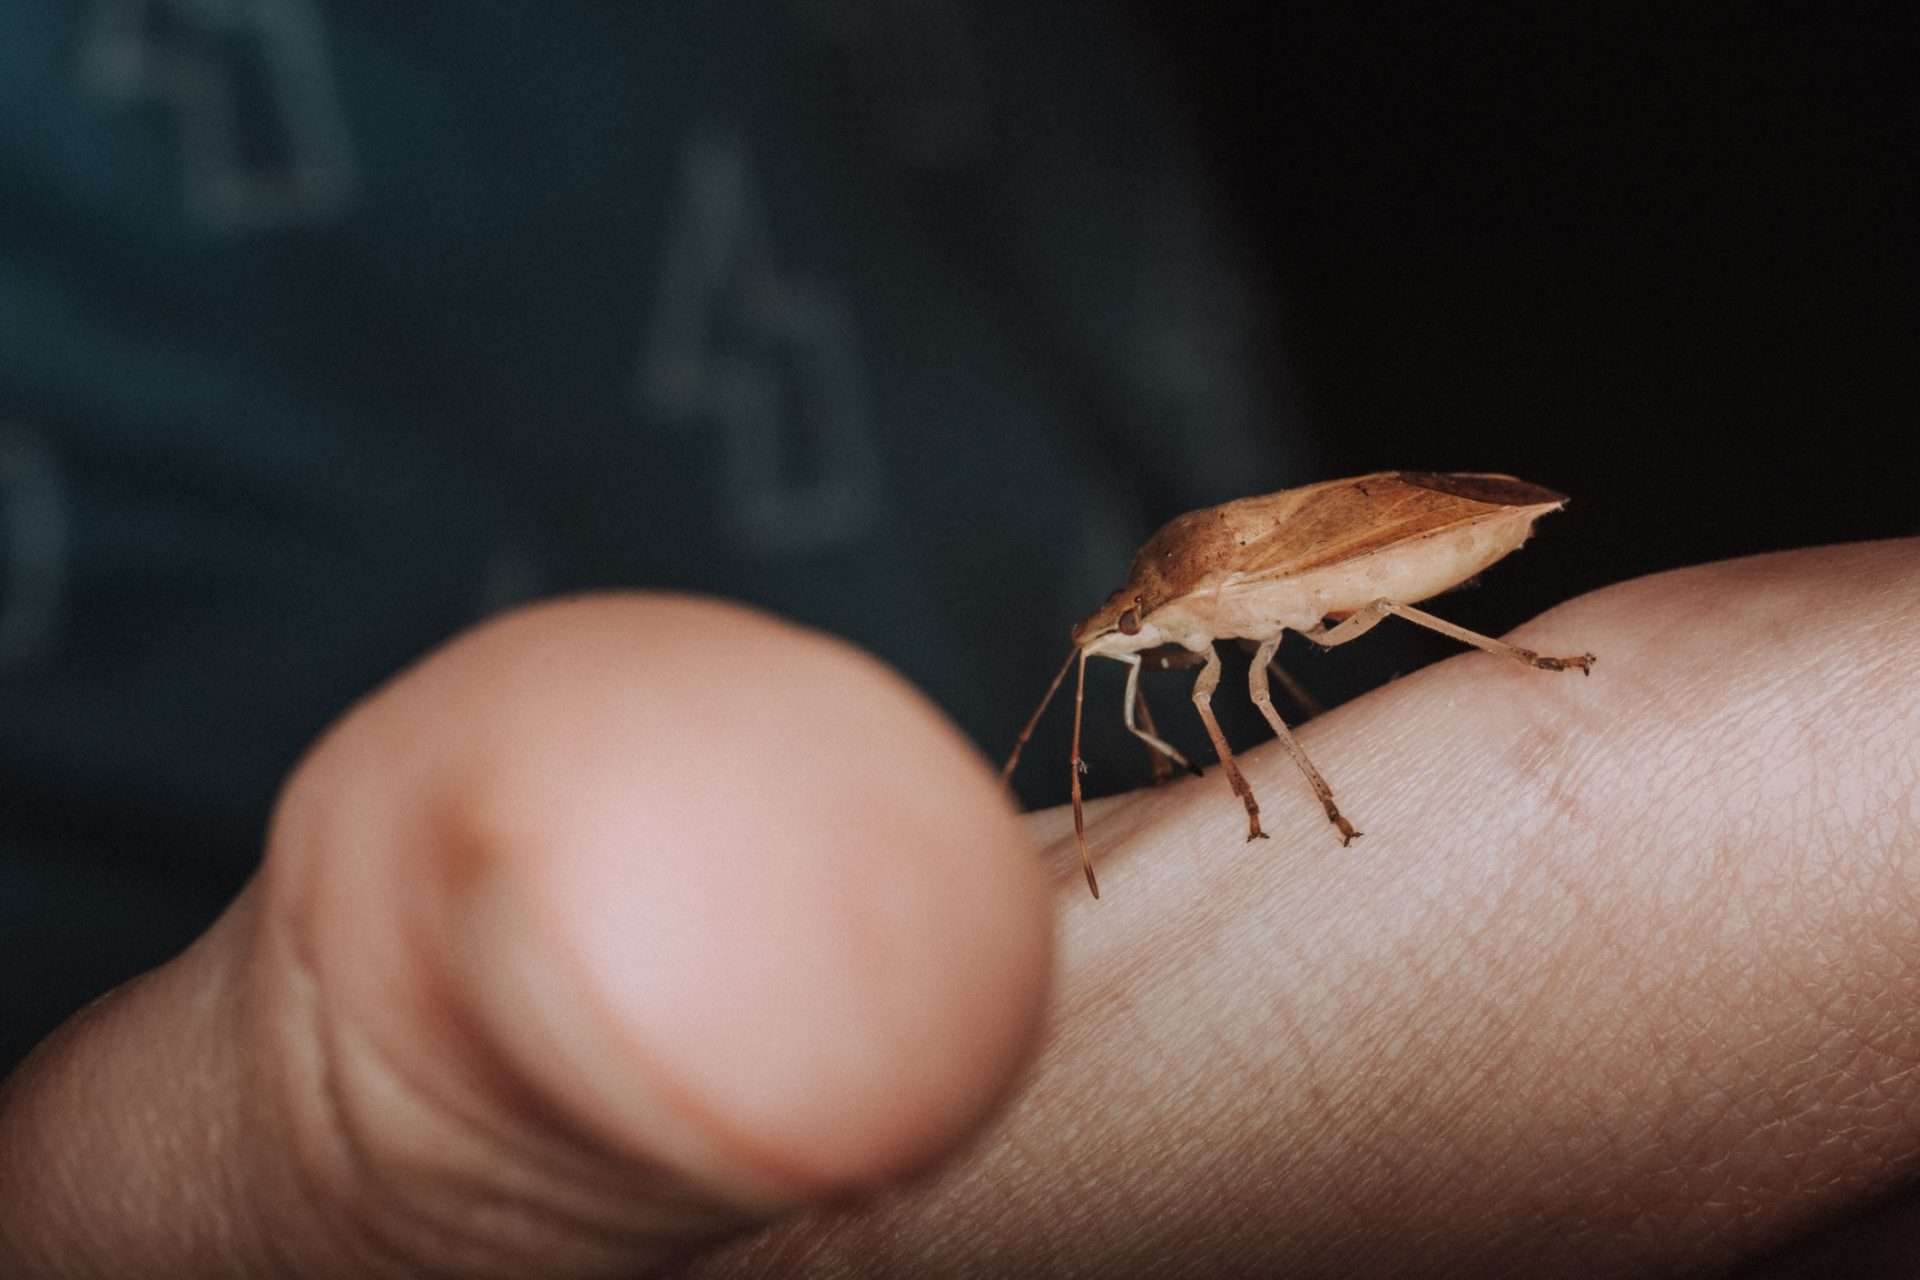 Stink bug crawling on a persons hand